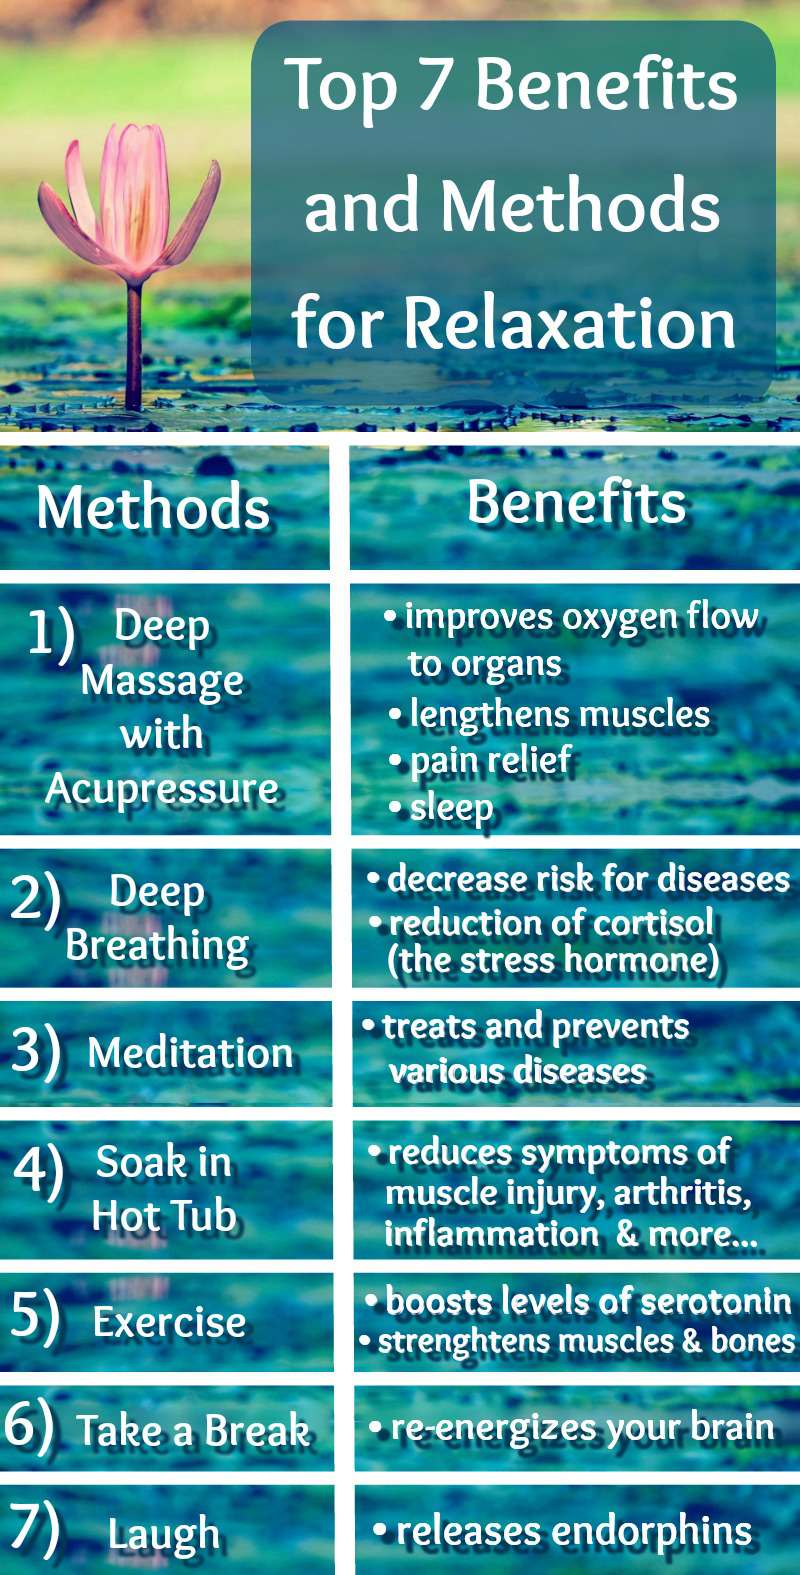 Benefits of Relaxation & Methods for Your Health